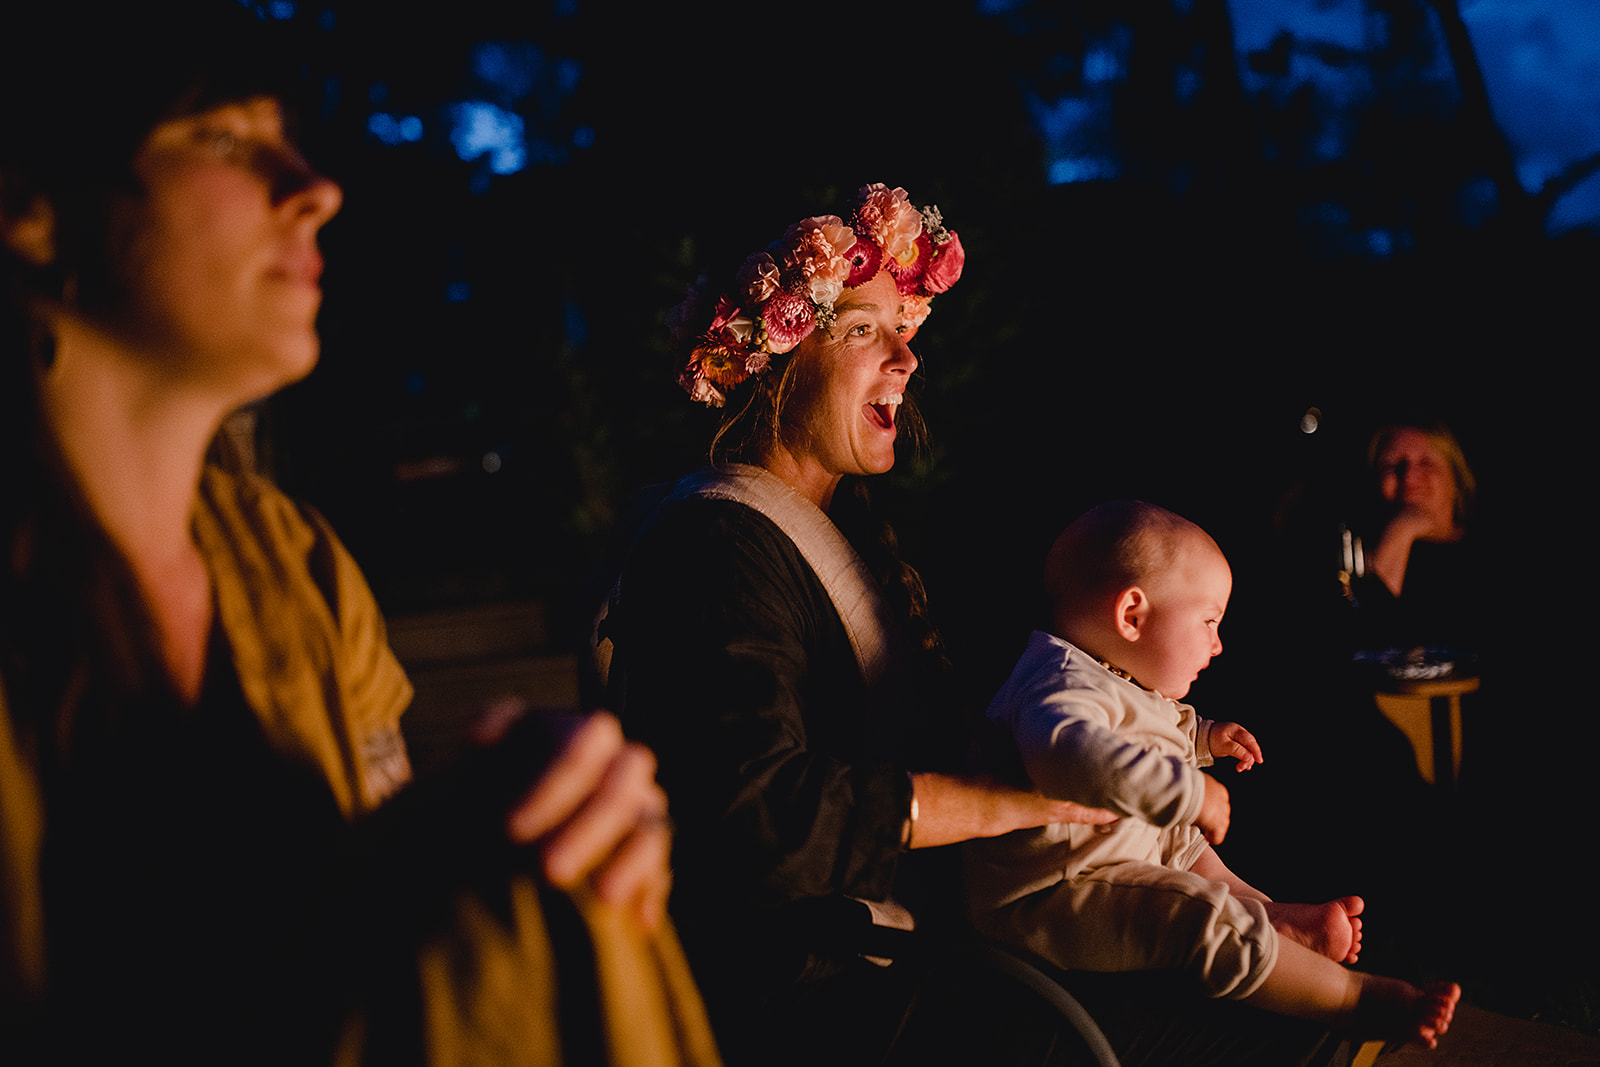 Bride in a floral crown laughing with her baby on her lap at an evening outdoor celebration